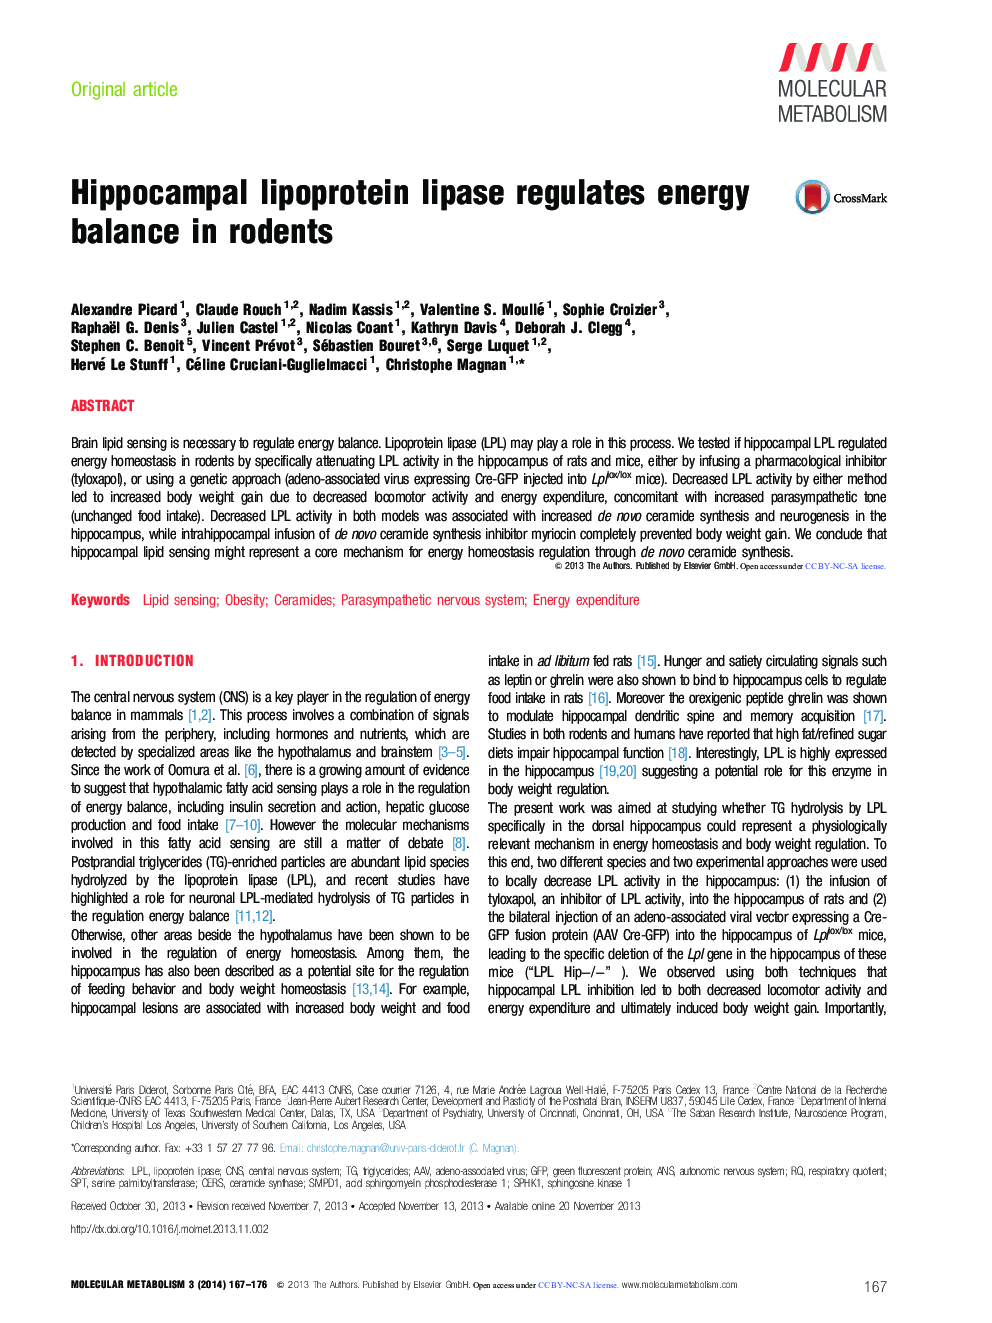 Hippocampal lipoprotein lipase regulates energy balance in rodents